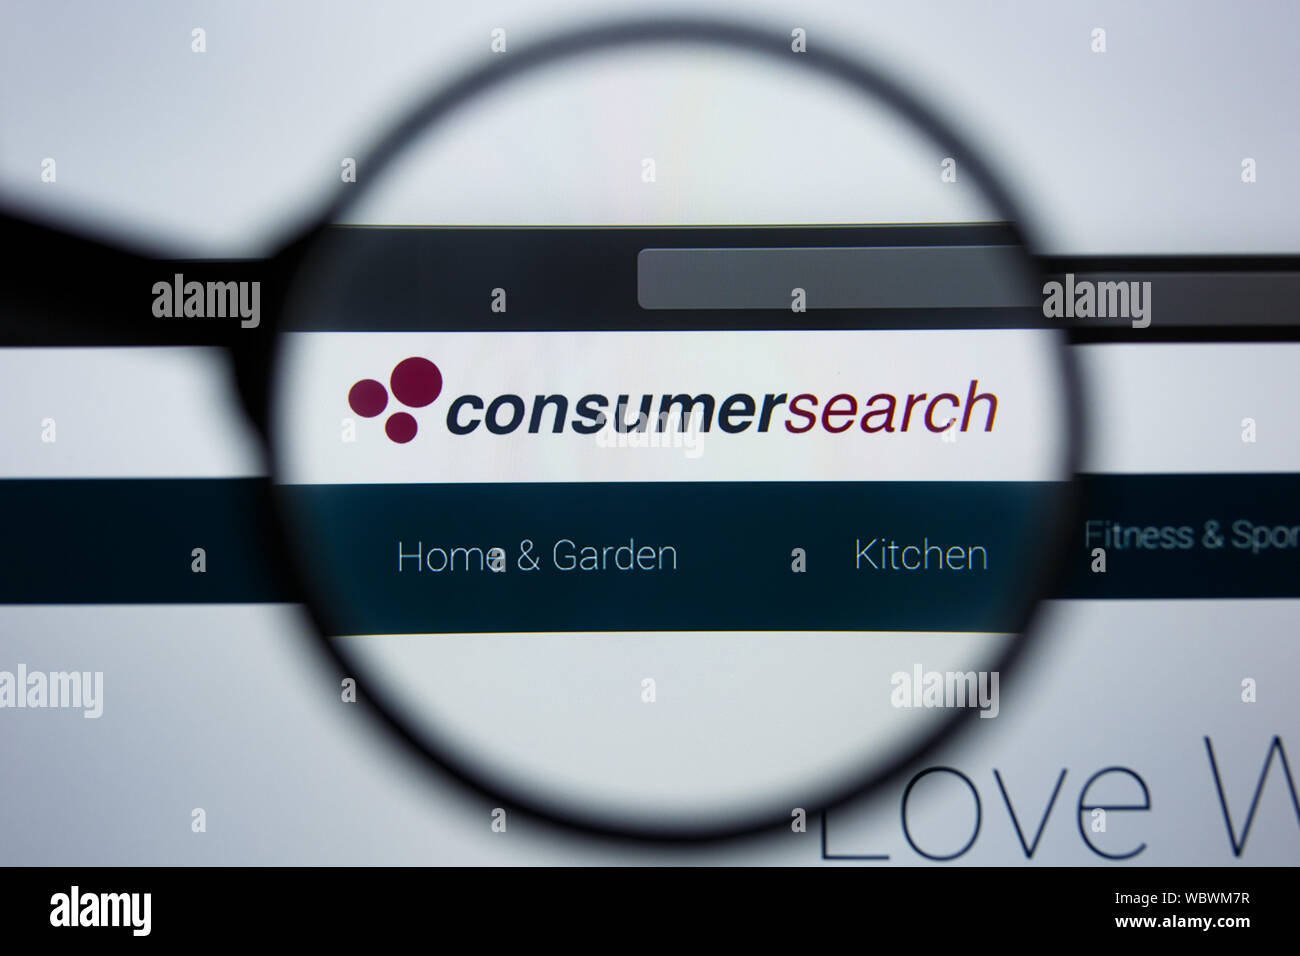 Los Angeles, California, USA - 21 Jule 2019: Illustrative Editorial of CONSUMERSEARCH.COM website homepage. CONSUMER SEARCH logo visible on display screen. Stock Photo